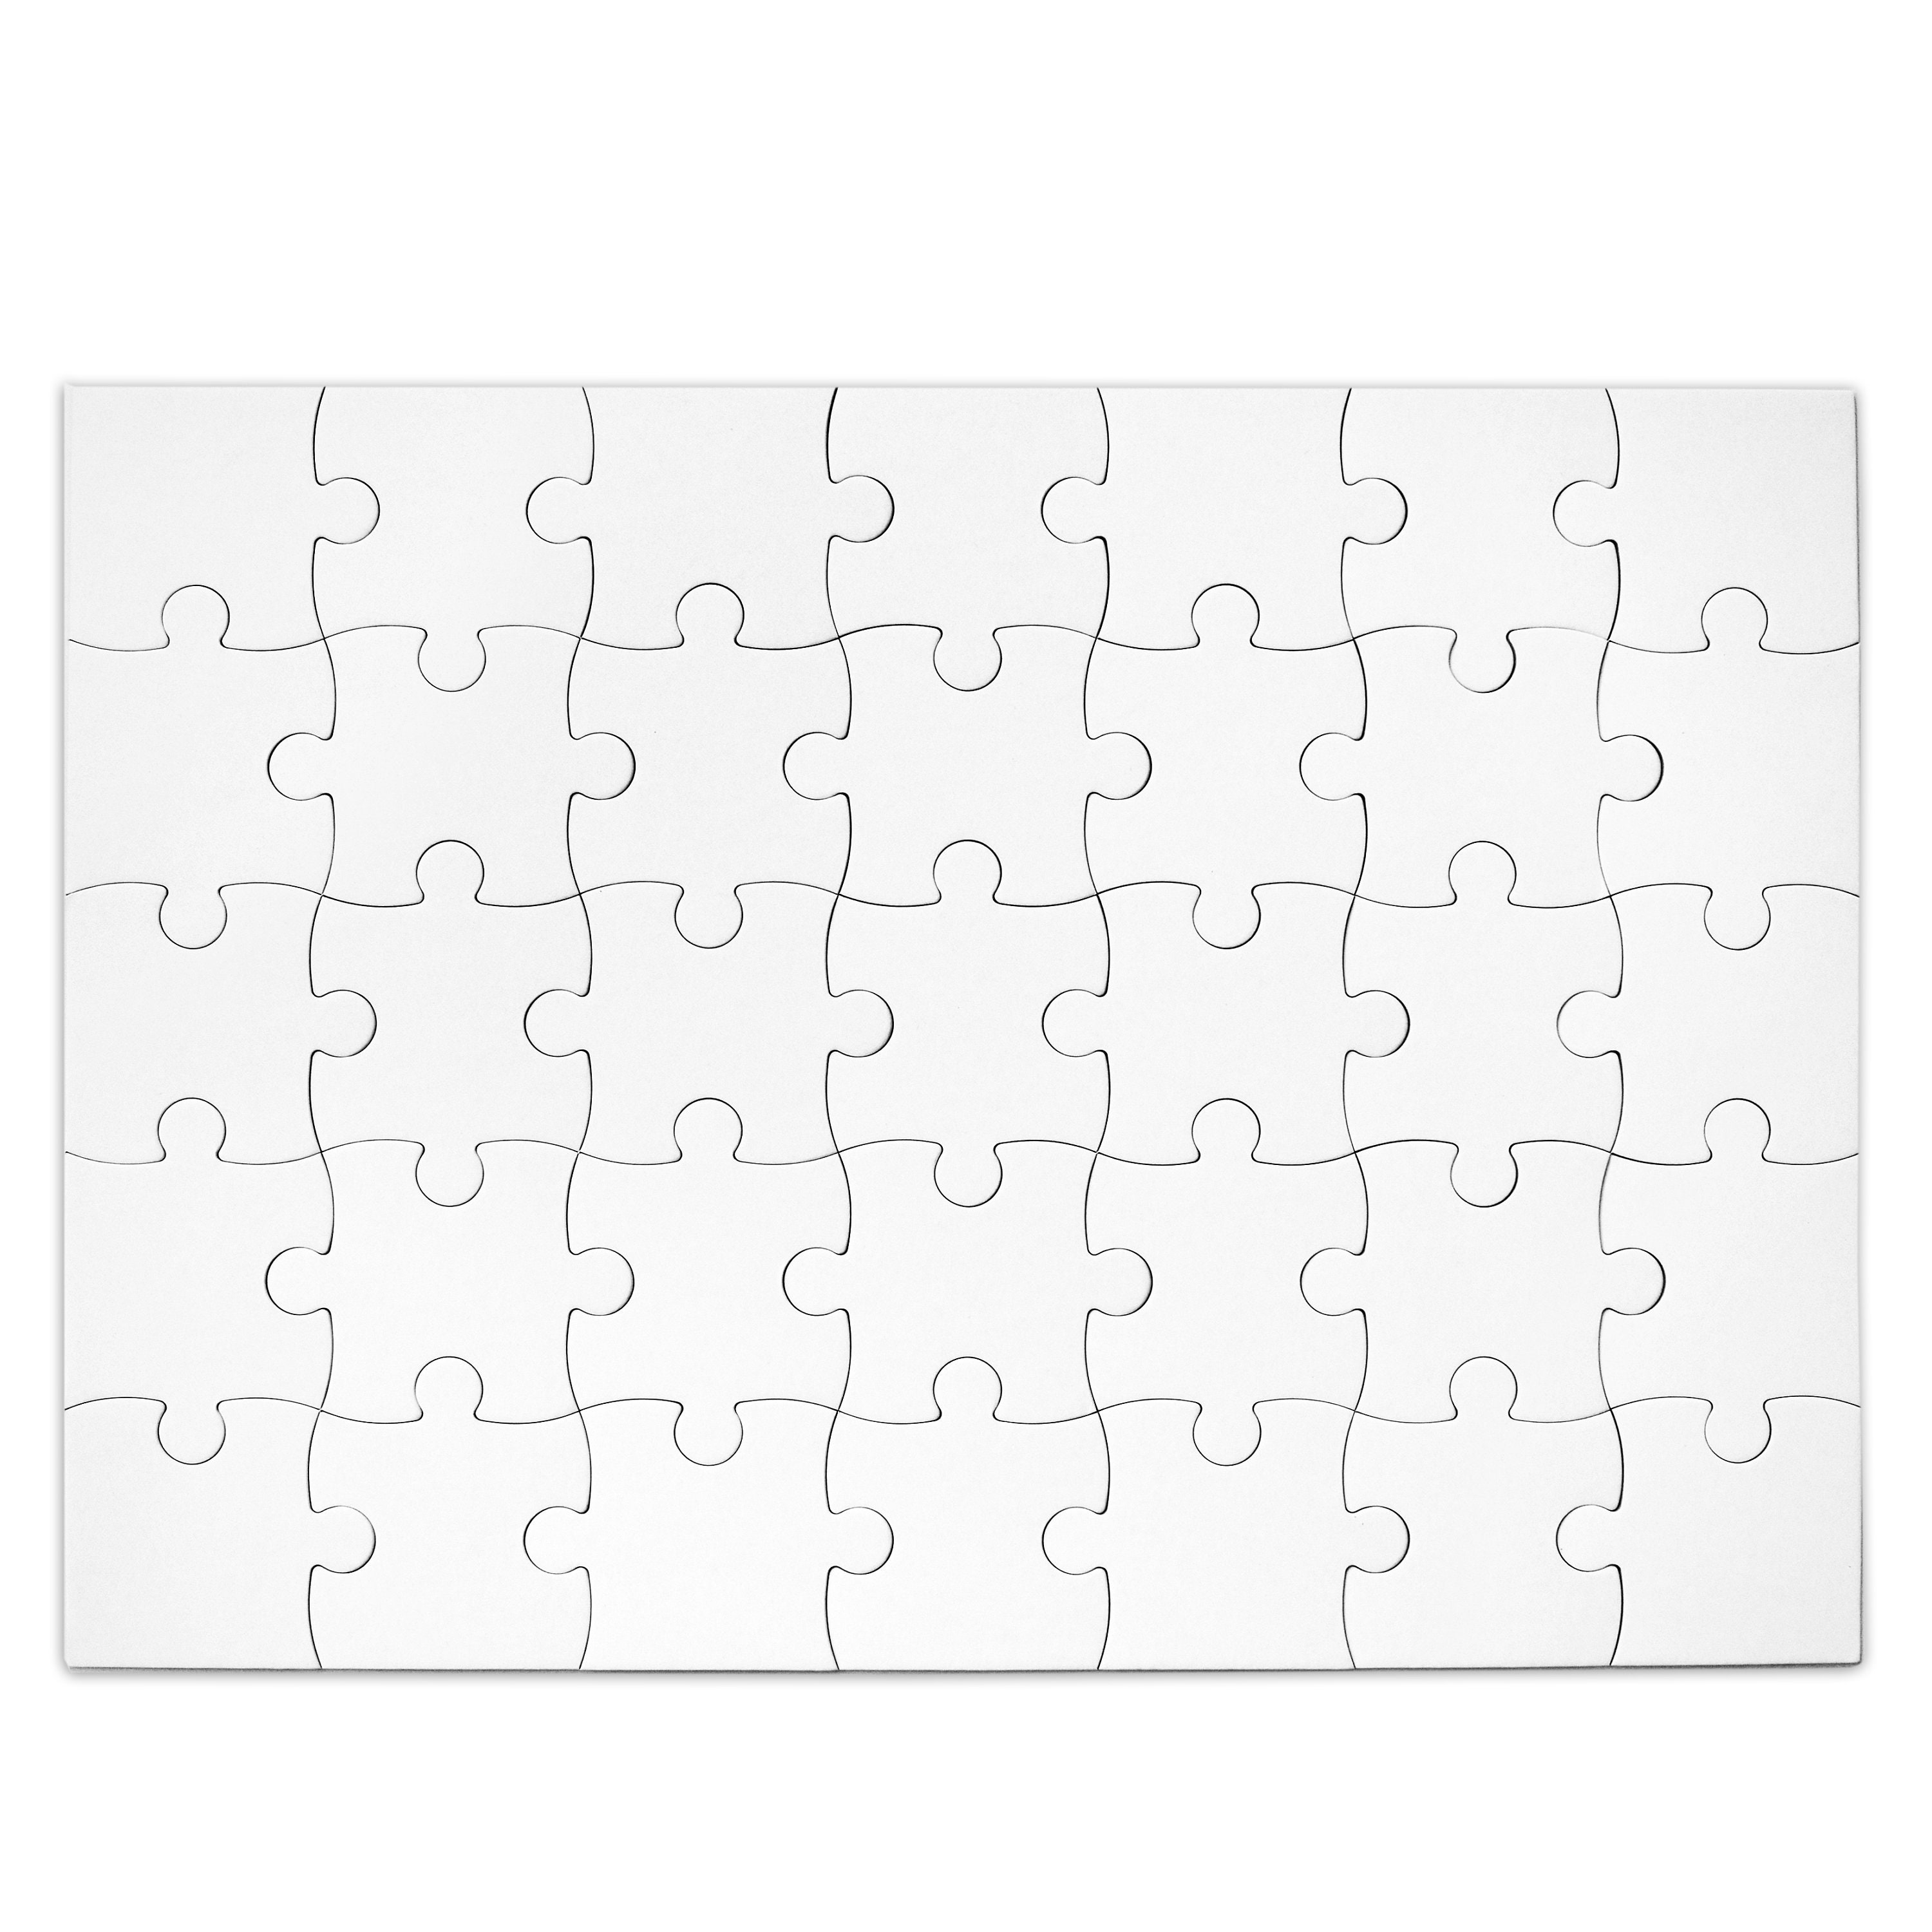 UPlama 300pcs Blank Puzzles, Freeform Blank Puzzle Pieces Blank Wooden Puzzles DIY Jigsaw Puzzles Plain Puzzle Pieces for Crafts, Arts, Card Making